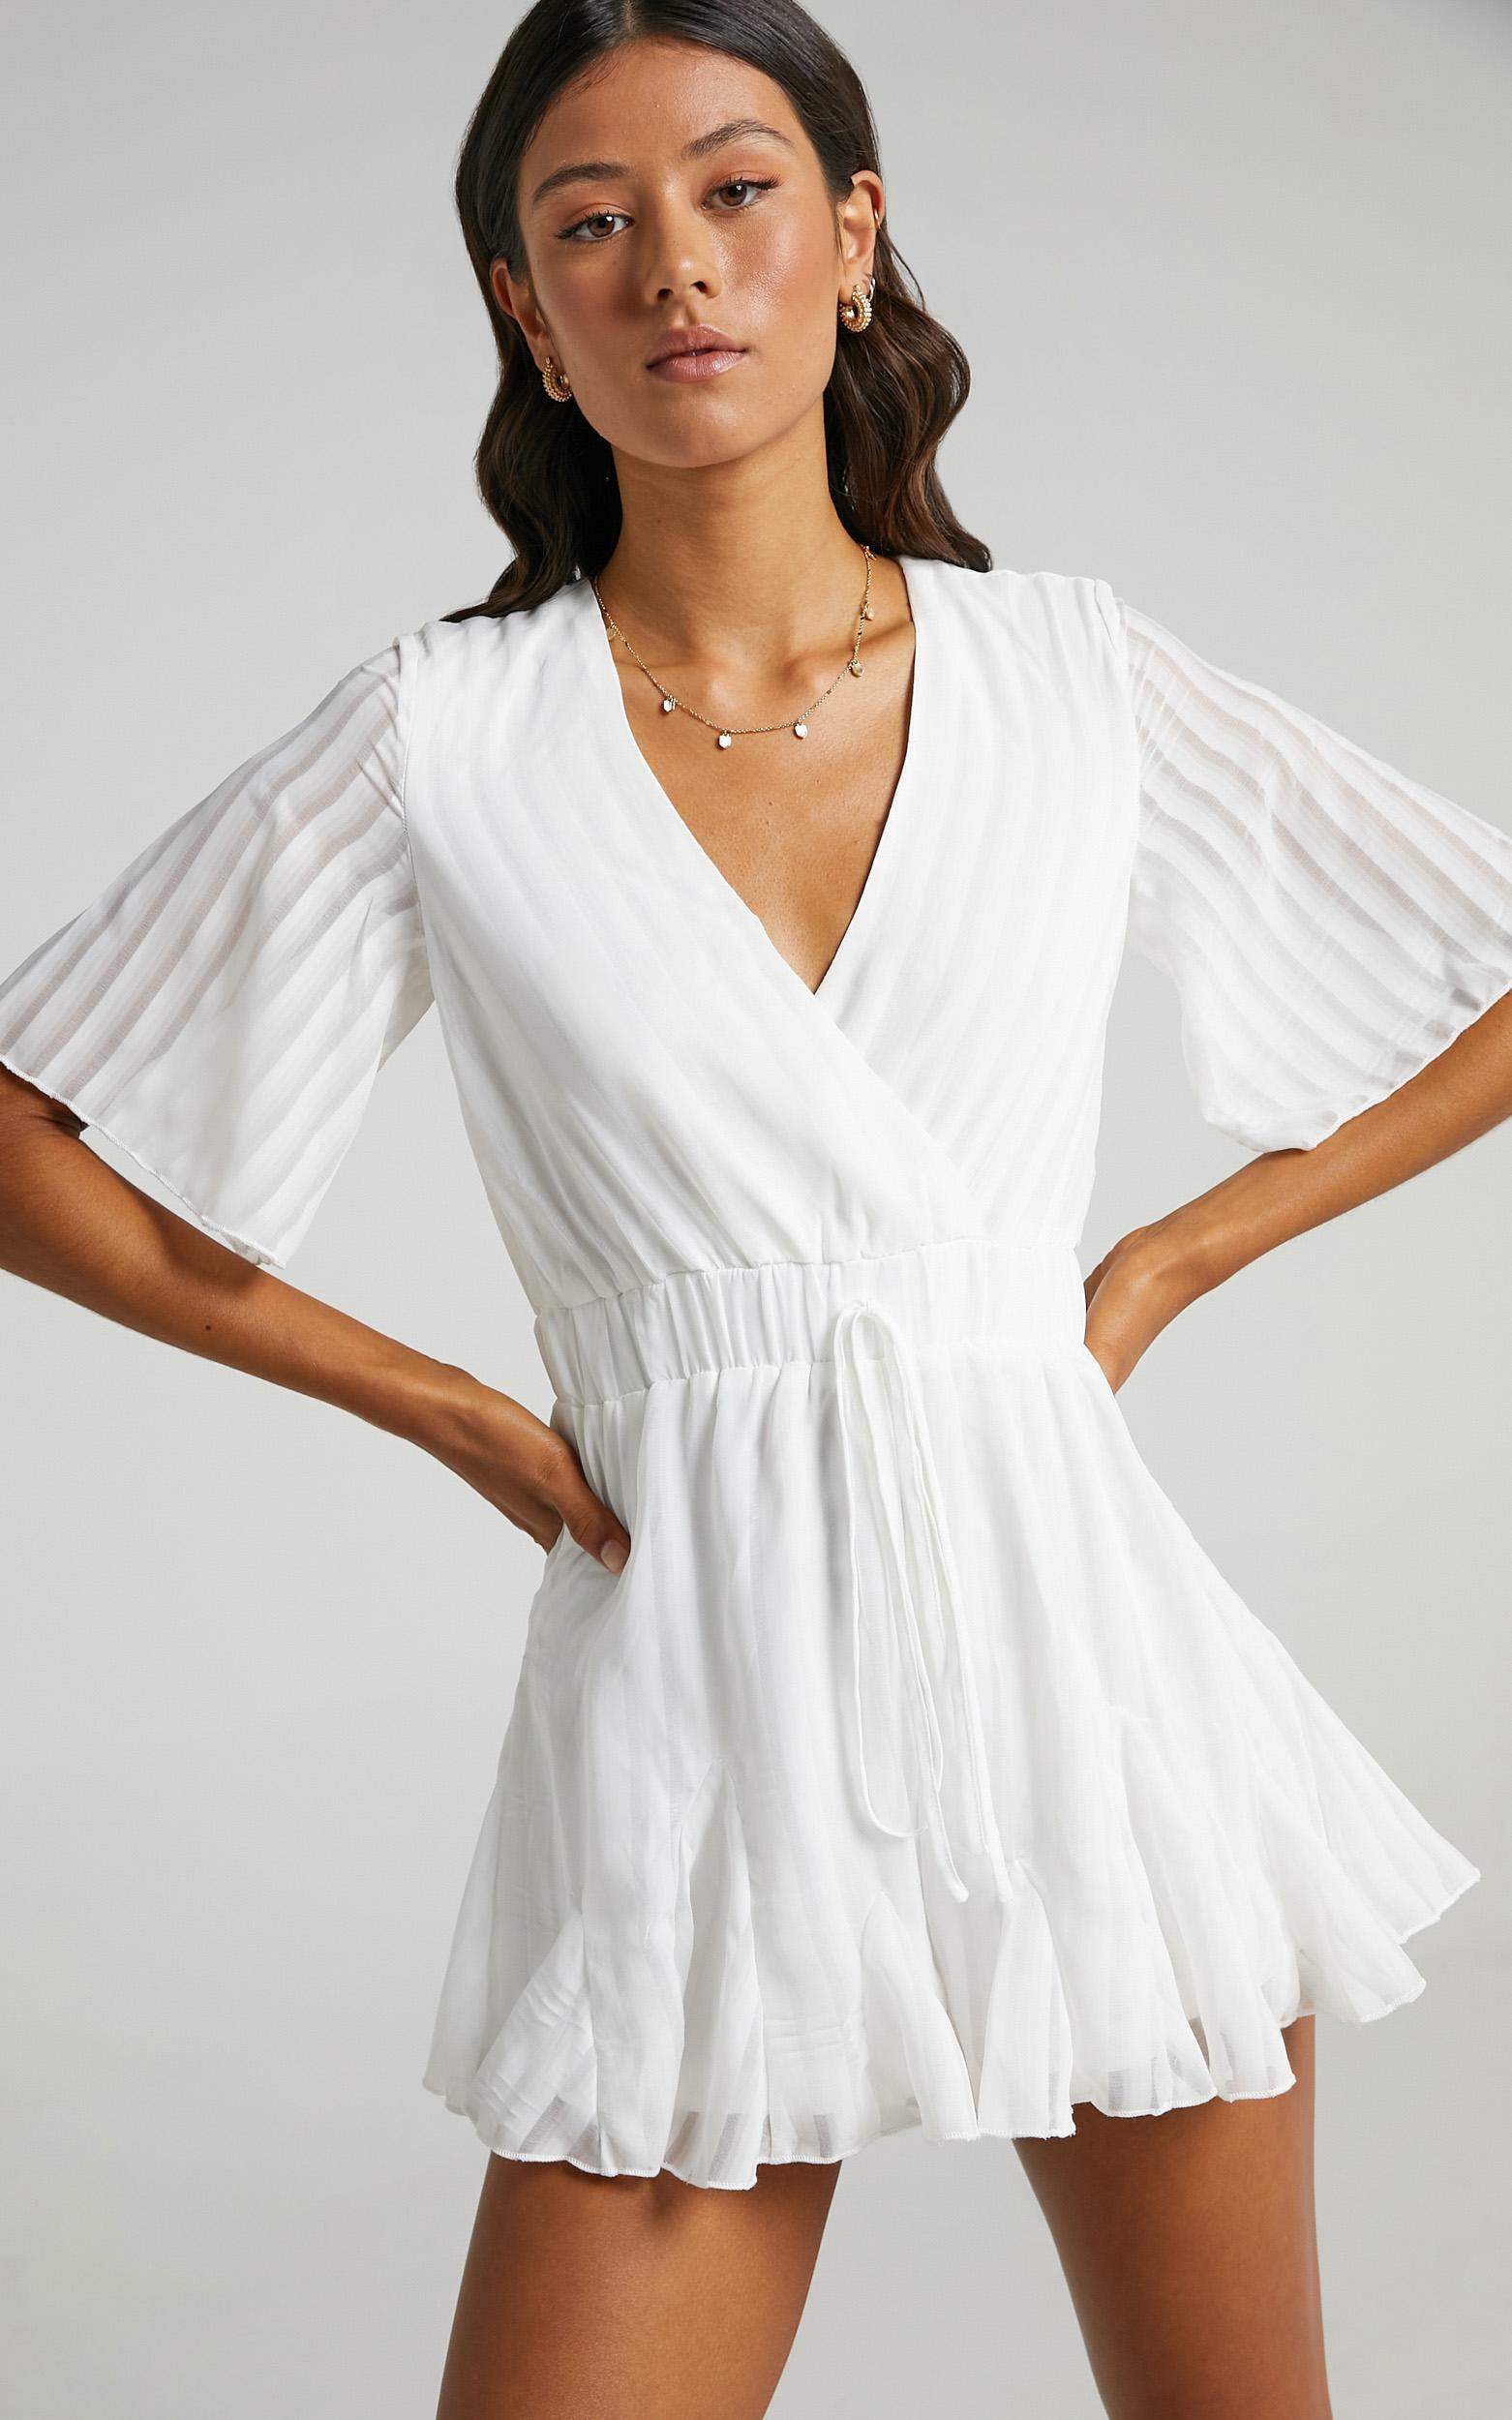 Play On My Heart Playsuit in White - 04, WHT5, hi-res image number null